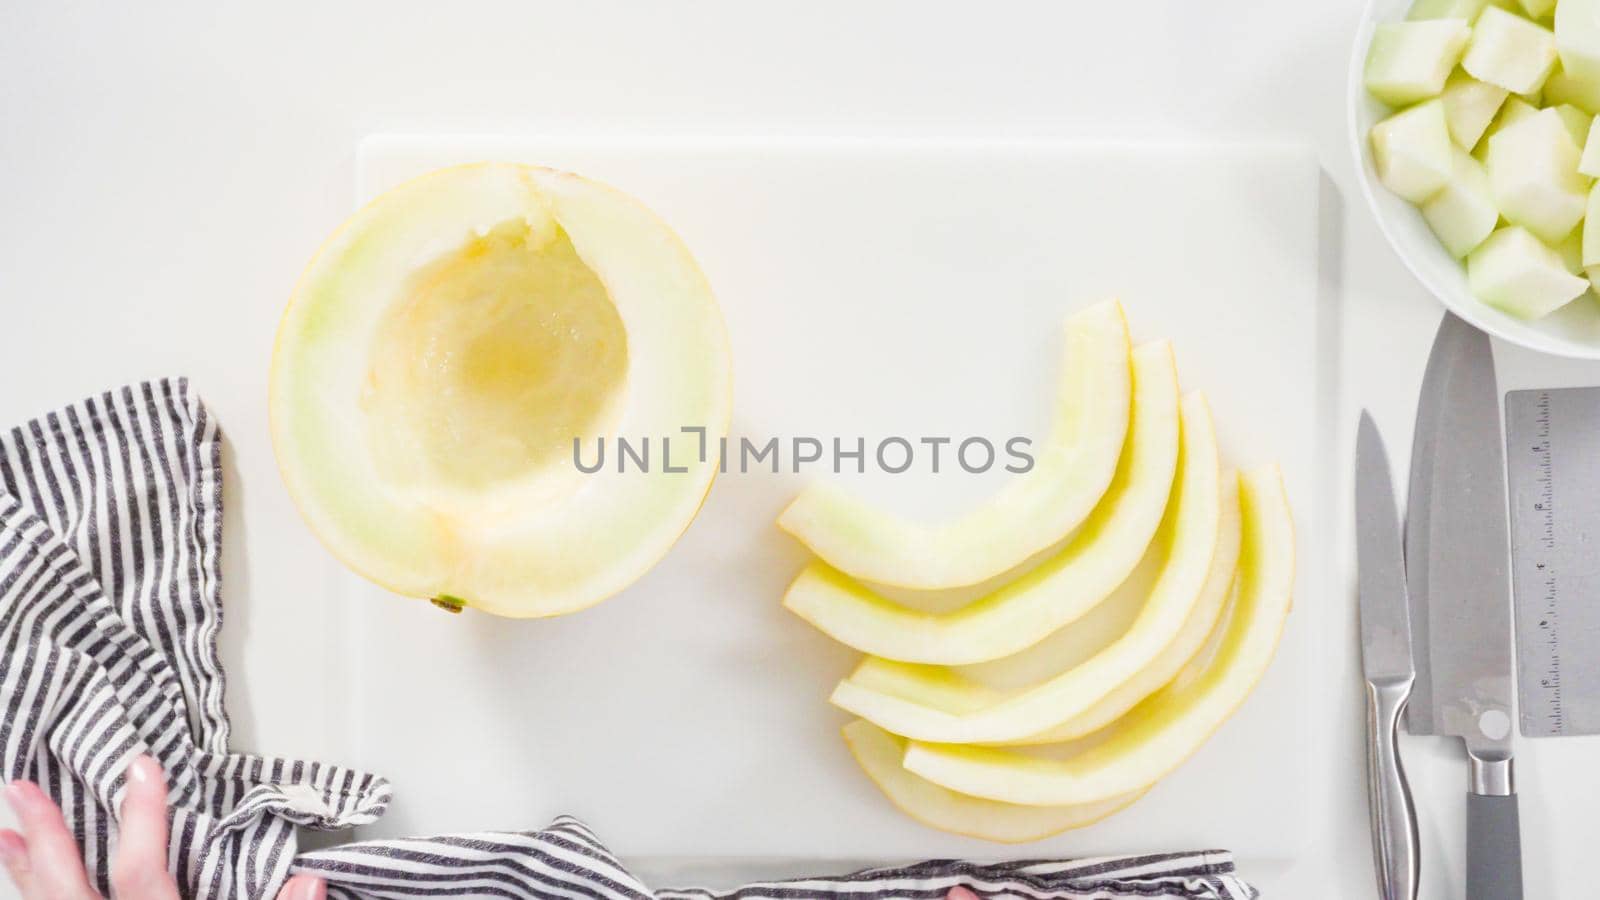 Step by step. Flat lay. Slicong golden dewlicious melon on a white cutting board.